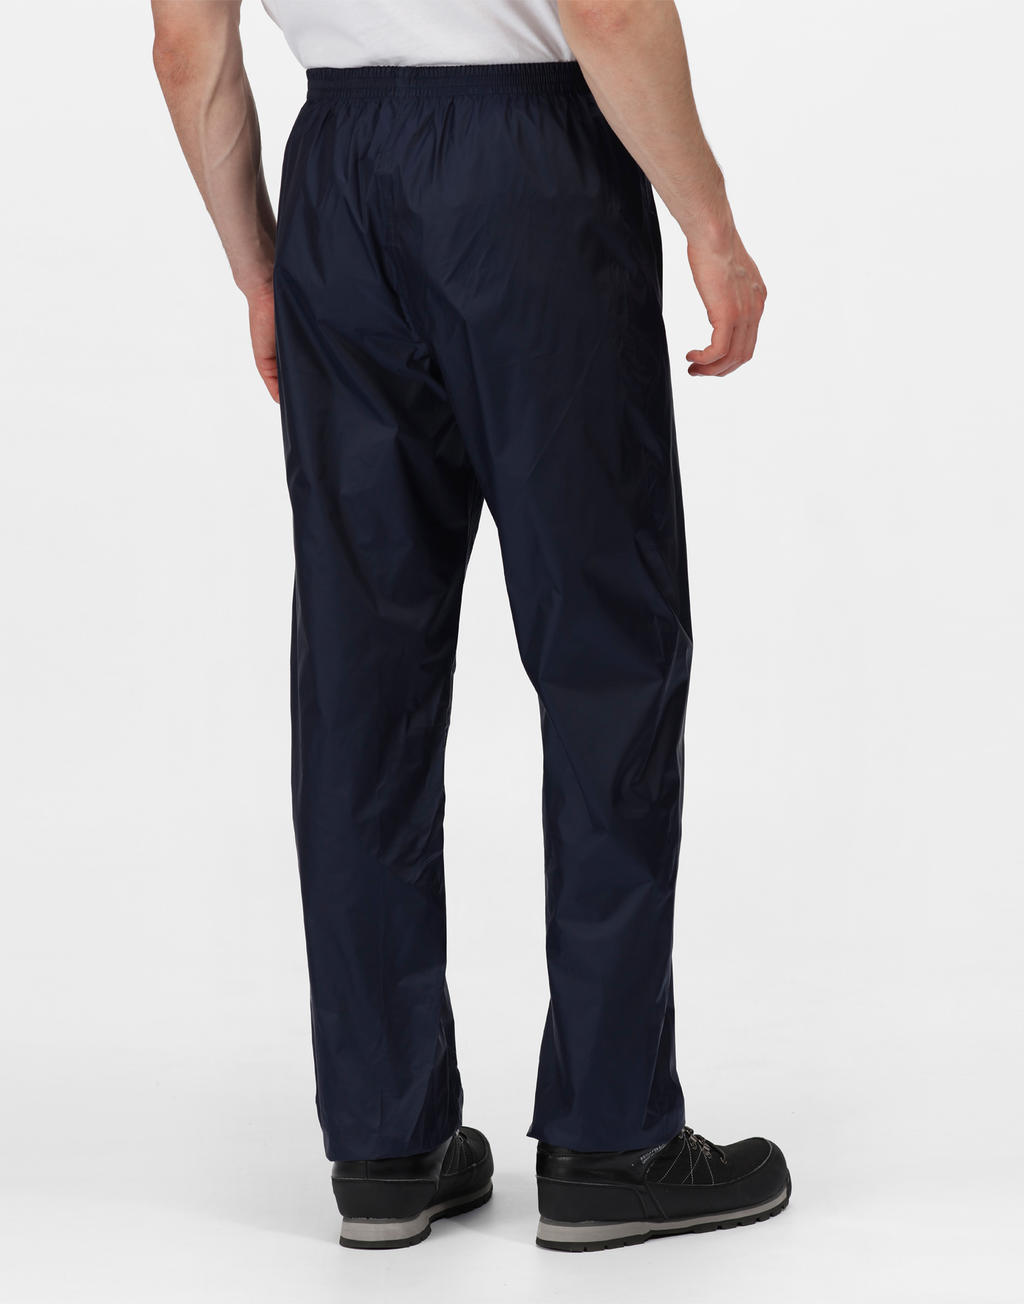  Pro Pack Away Overtrousers in Farbe Black